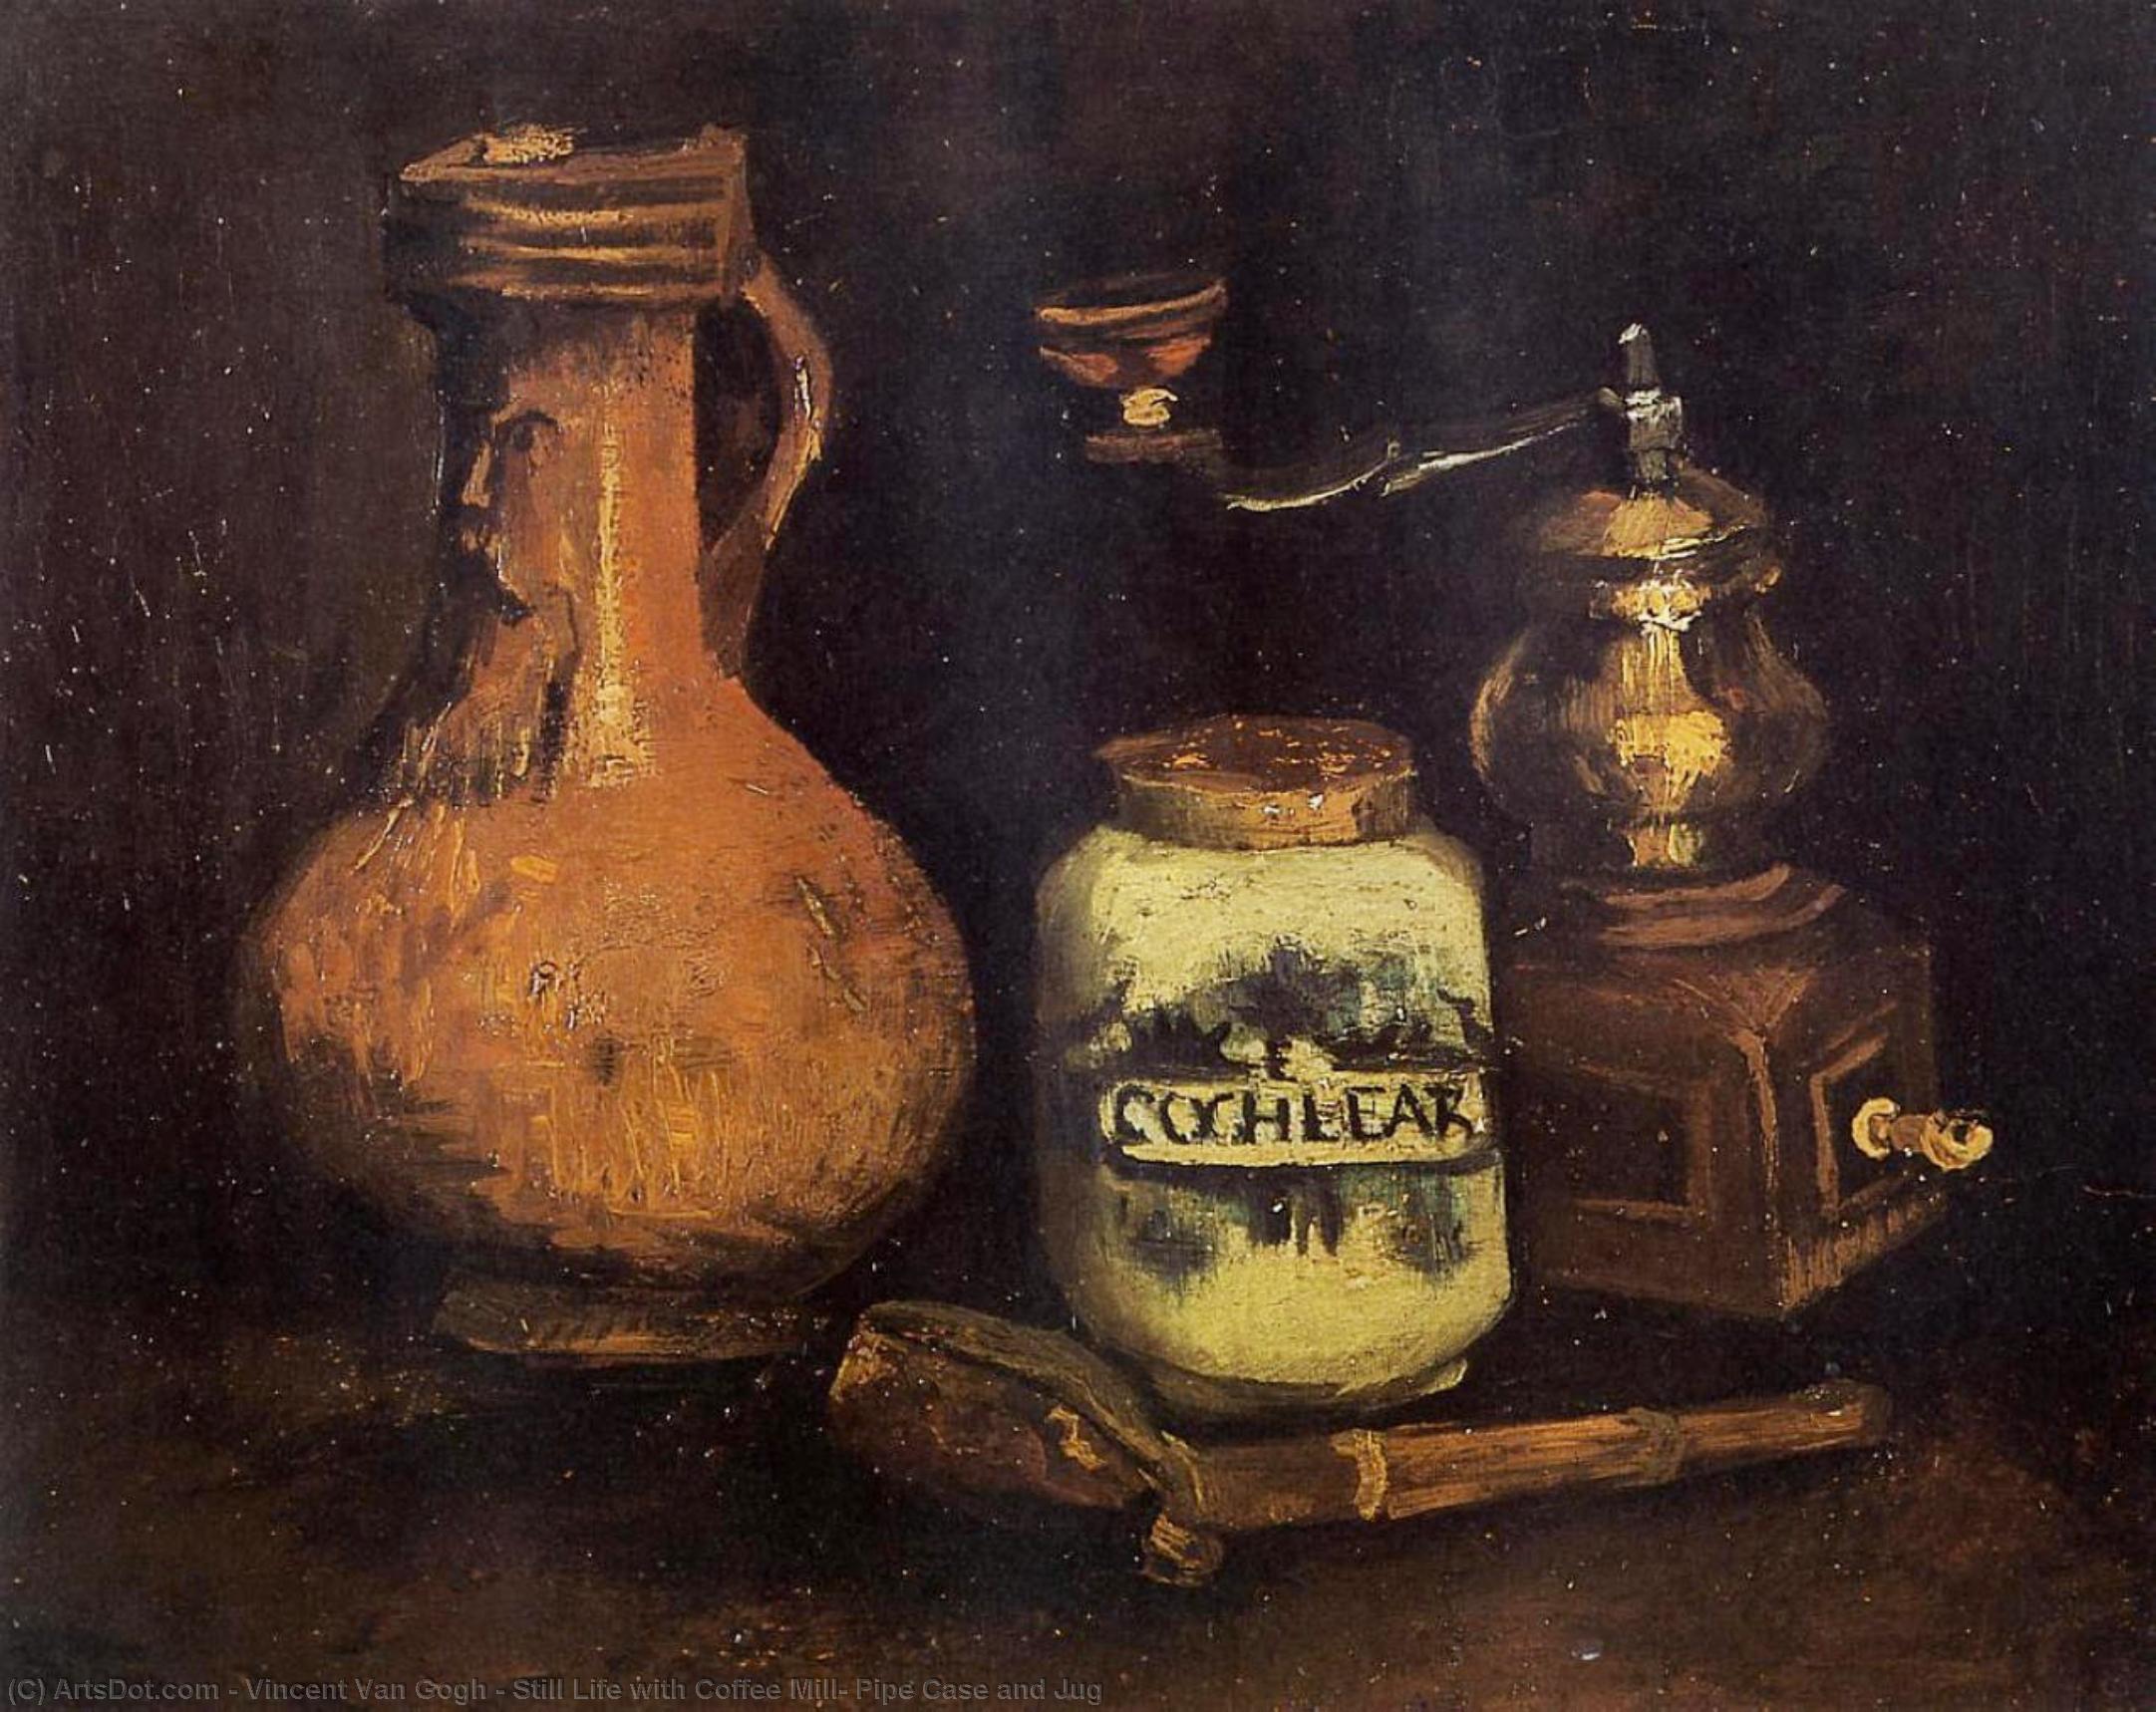 Buy Museum Art Reproductions Still Life with Coffee Mill, Pipe Case and Jug, 1884 by Vincent Van Gogh (1853-1890, Netherlands) | ArtsDot.com